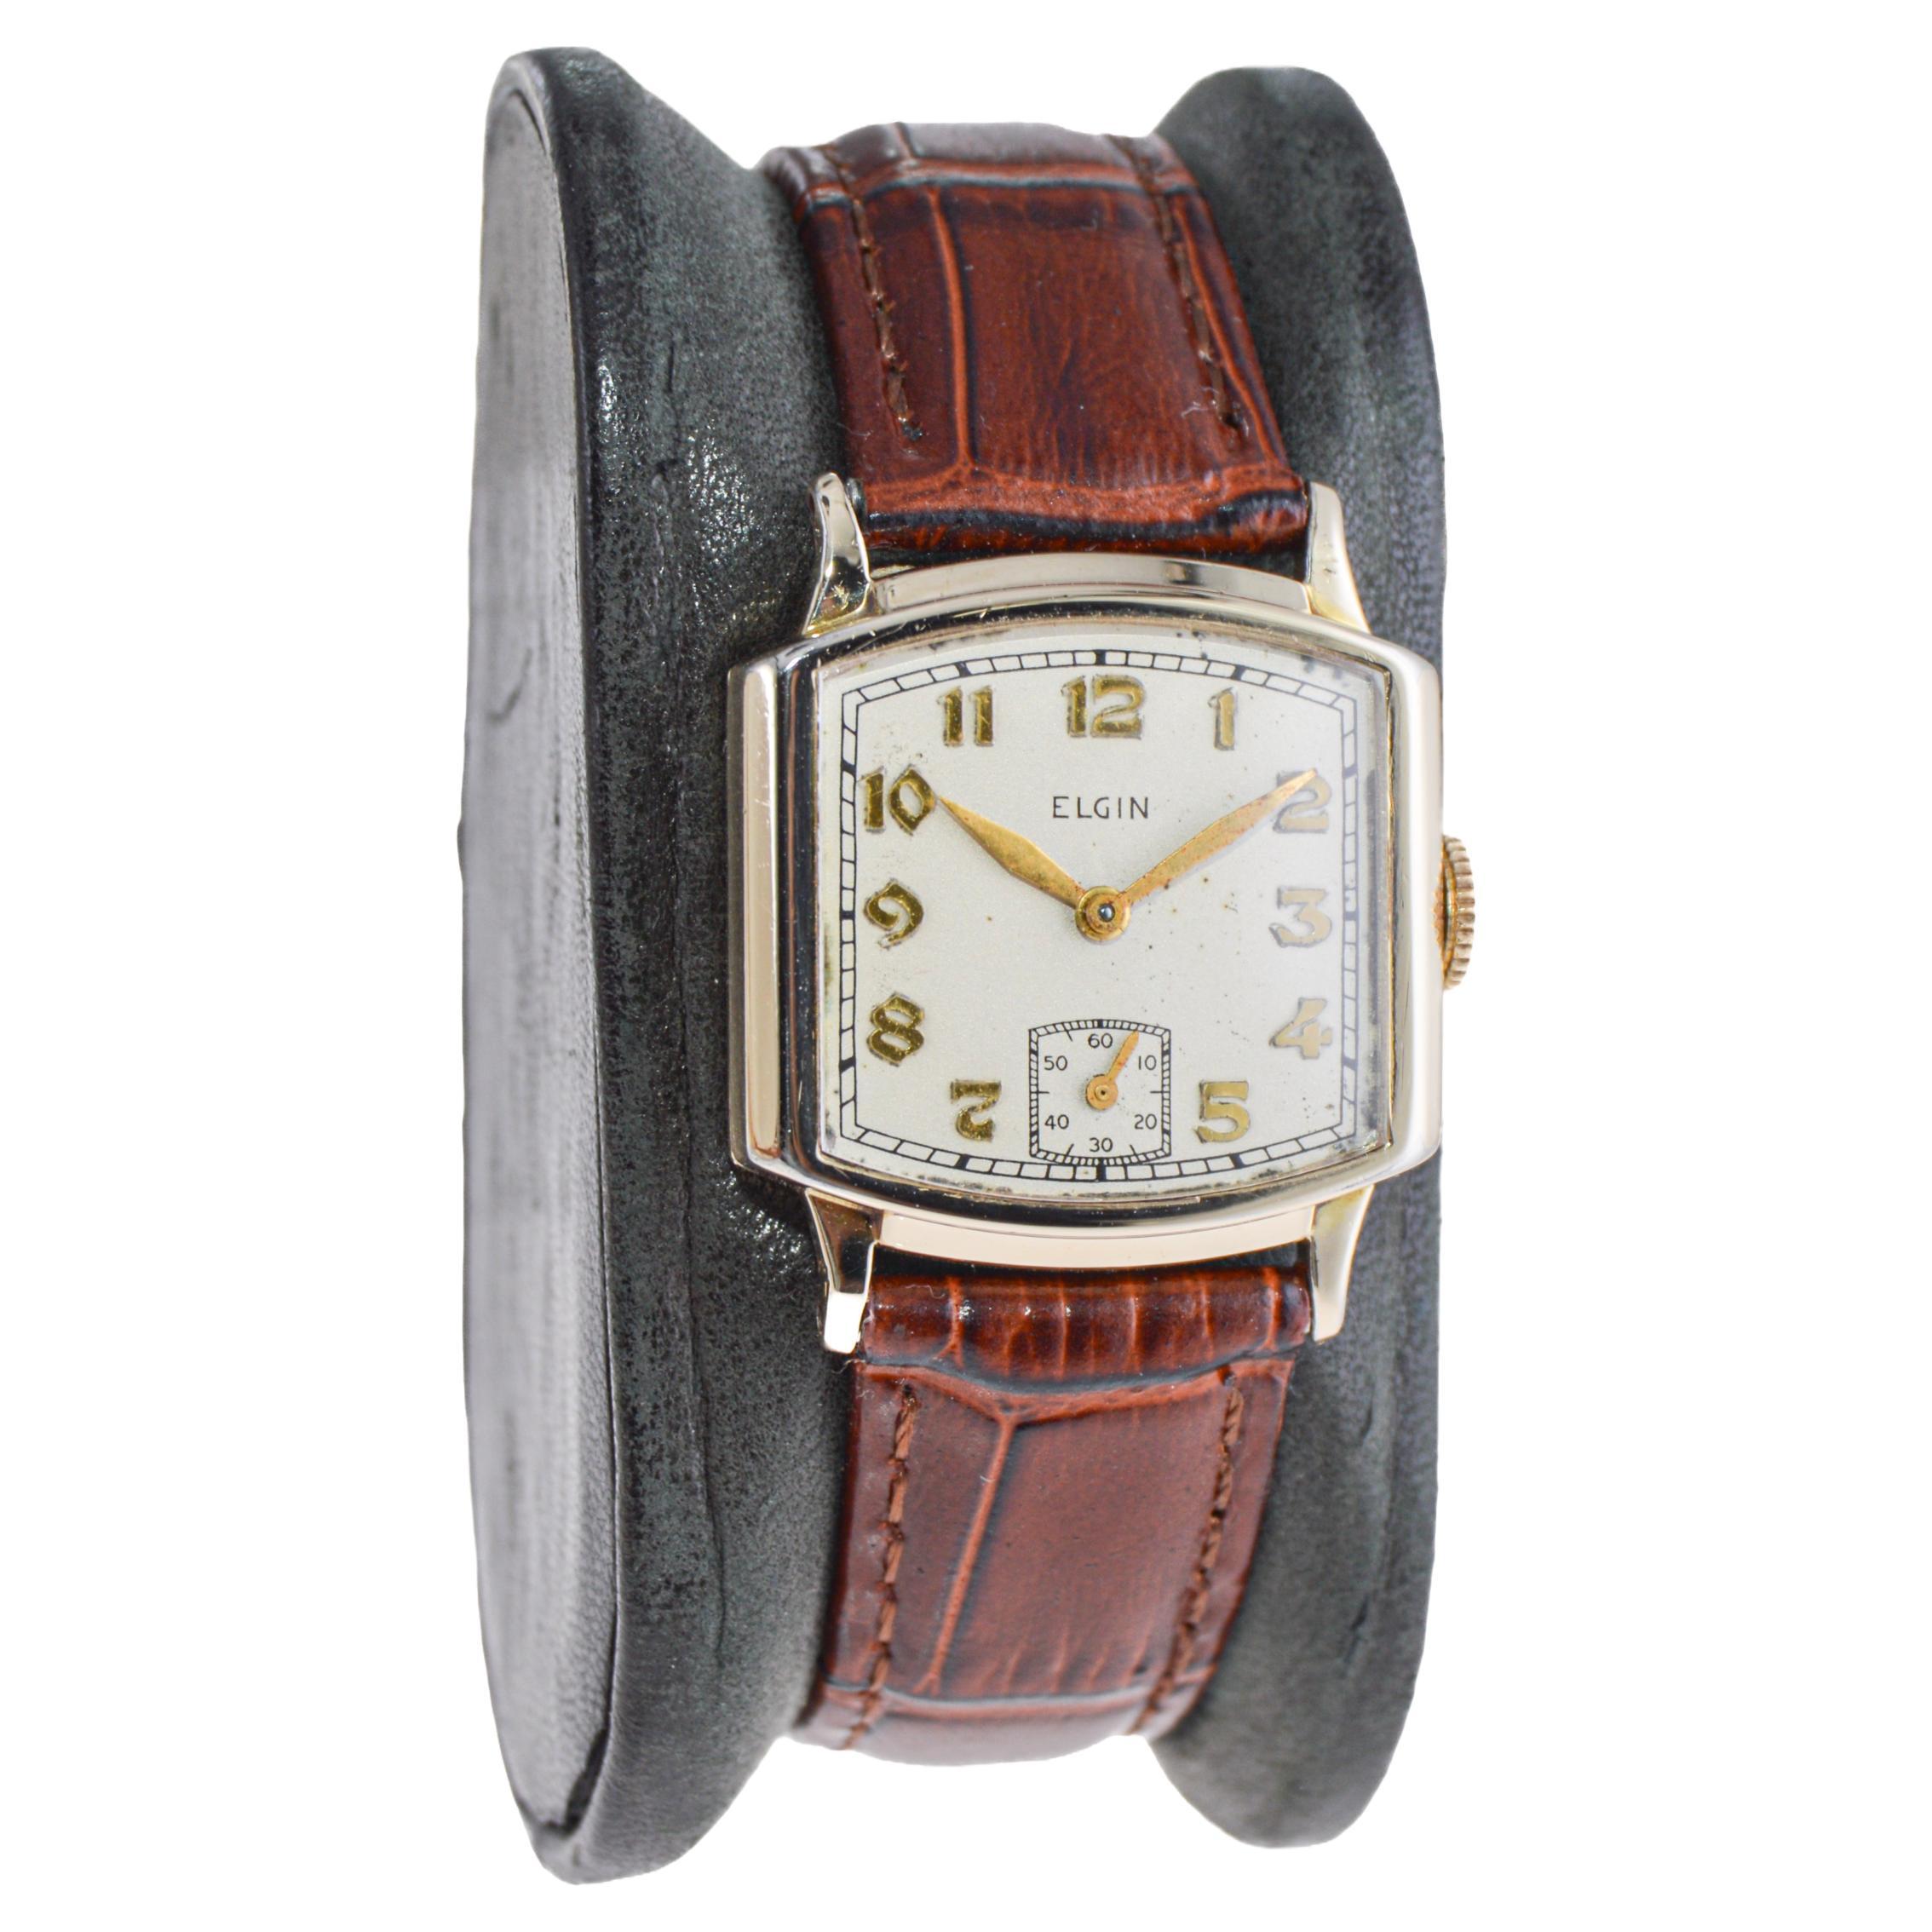 FACTORY / HOUSE: Elgin Watch Company
STYLE / REFERENCE: Art Deco / Tank Style
METAL / MATERIAL: Gold-Filled
CIRCA / YEAR: 1940's
DIMENSIONS / SIZE: Length 31mm X Width 26mm
MOVEMENT / CALIBER: Manual Winding / 21 Jewels 
DIAL / HANDS: Original